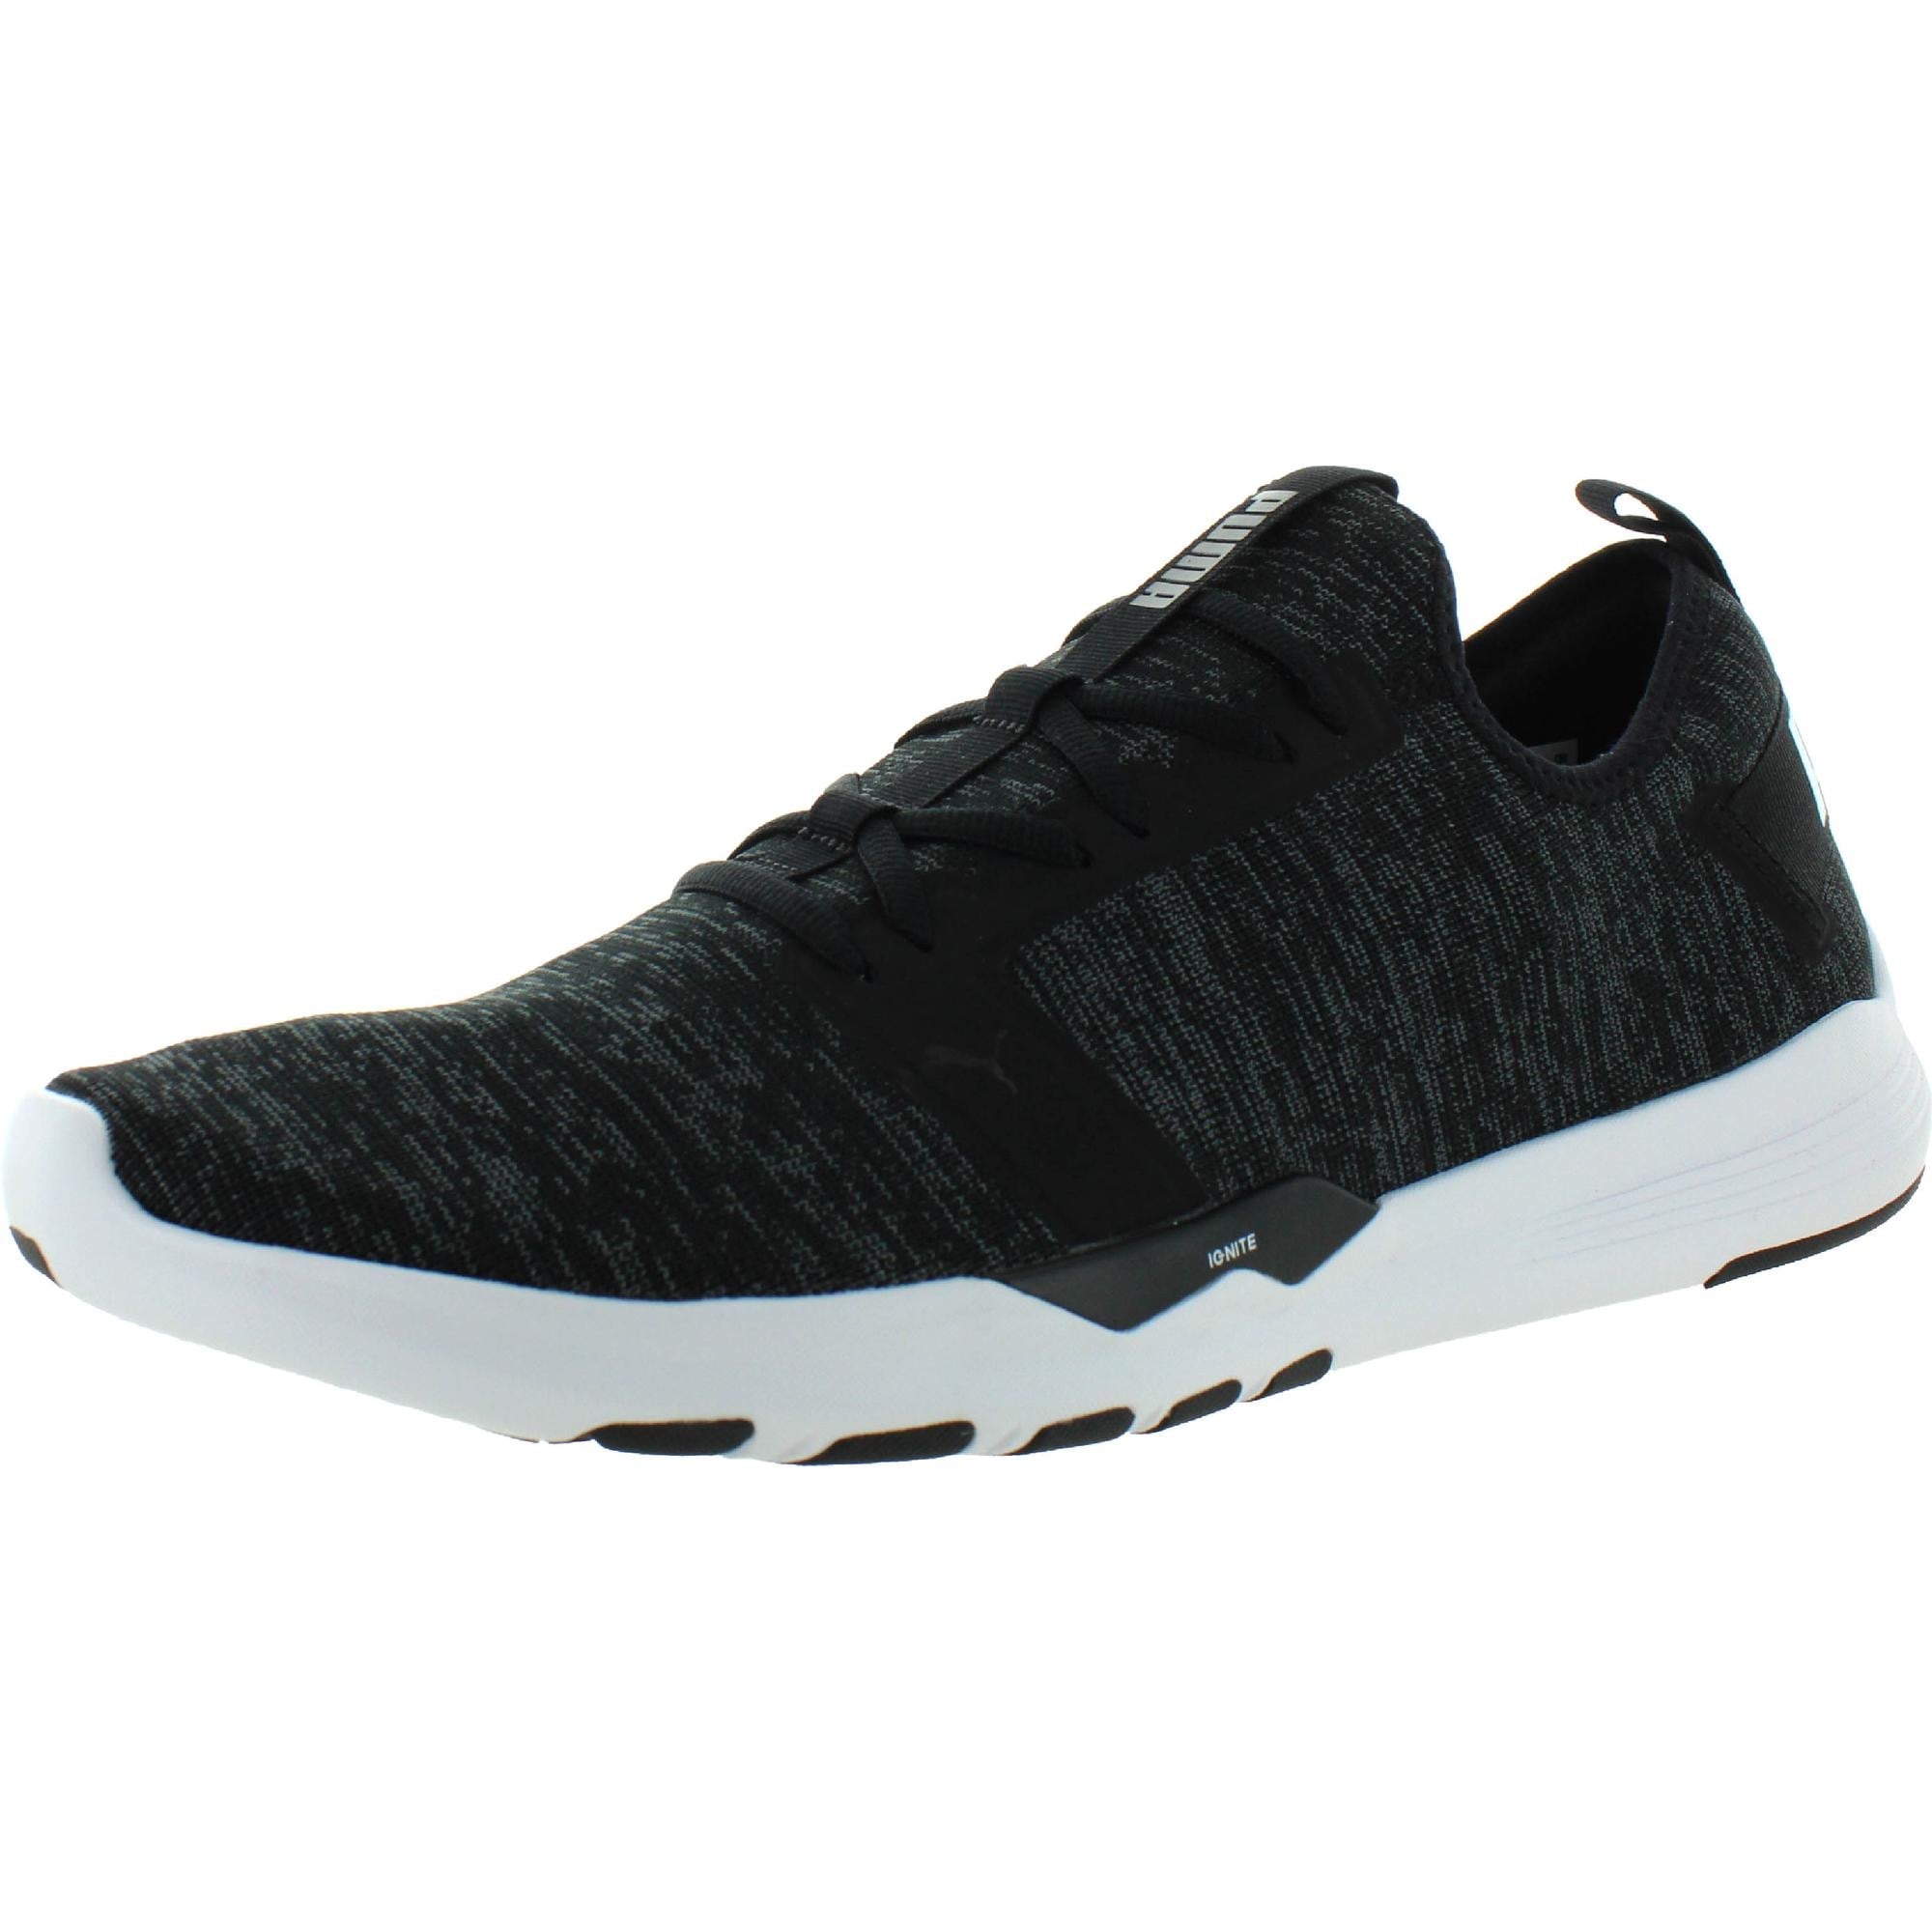 Ignite Contender Knit Running Shoes 